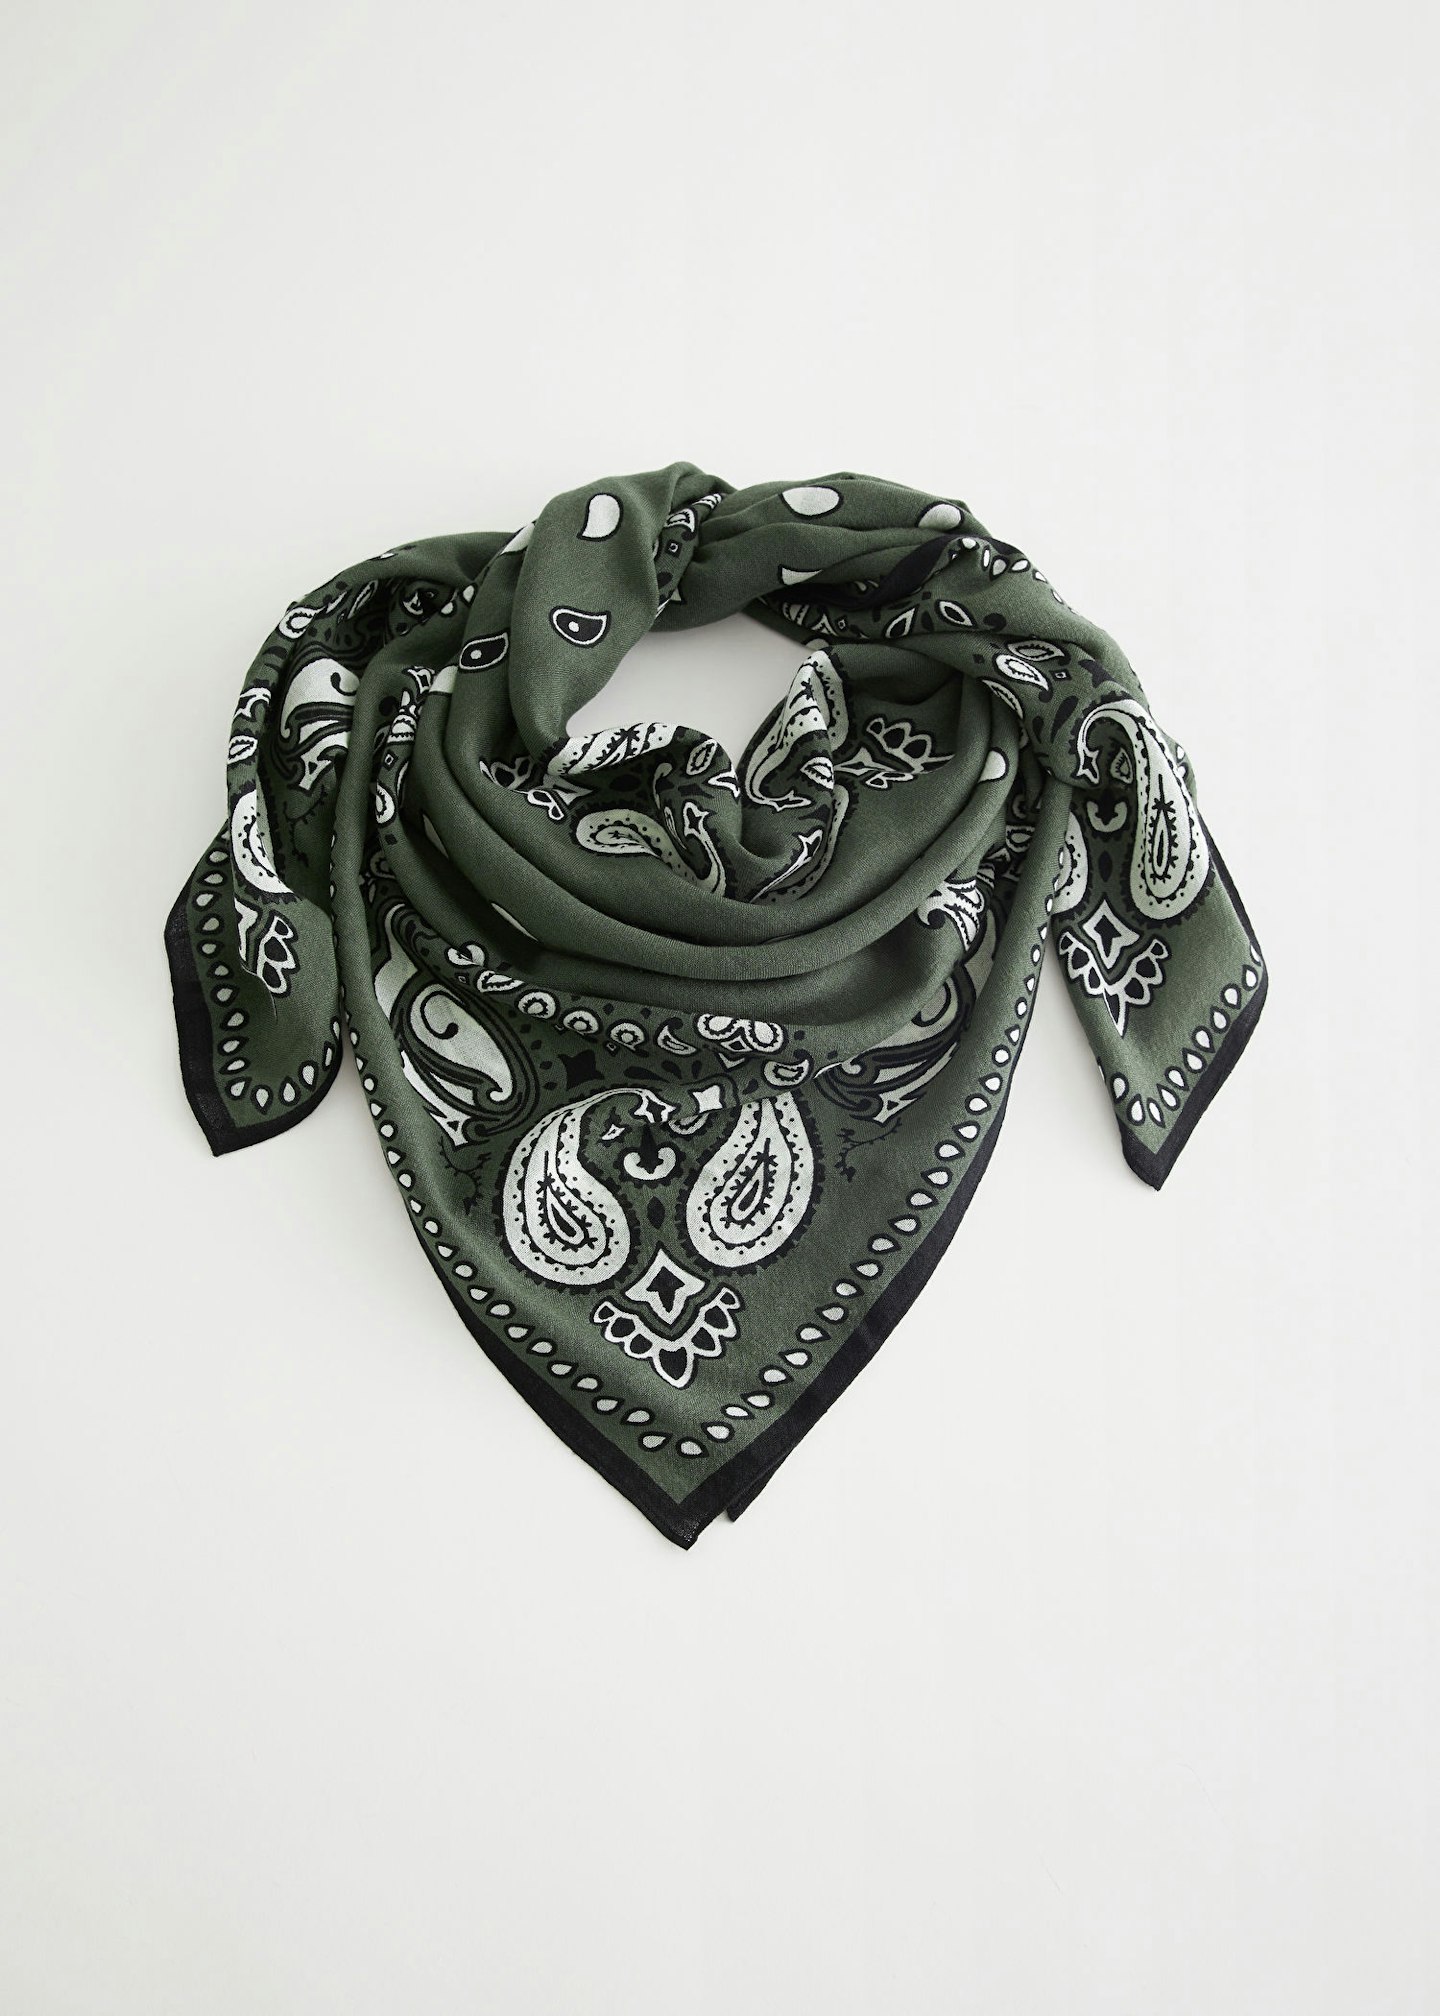 & Other Stories, Square Paisley Scarf